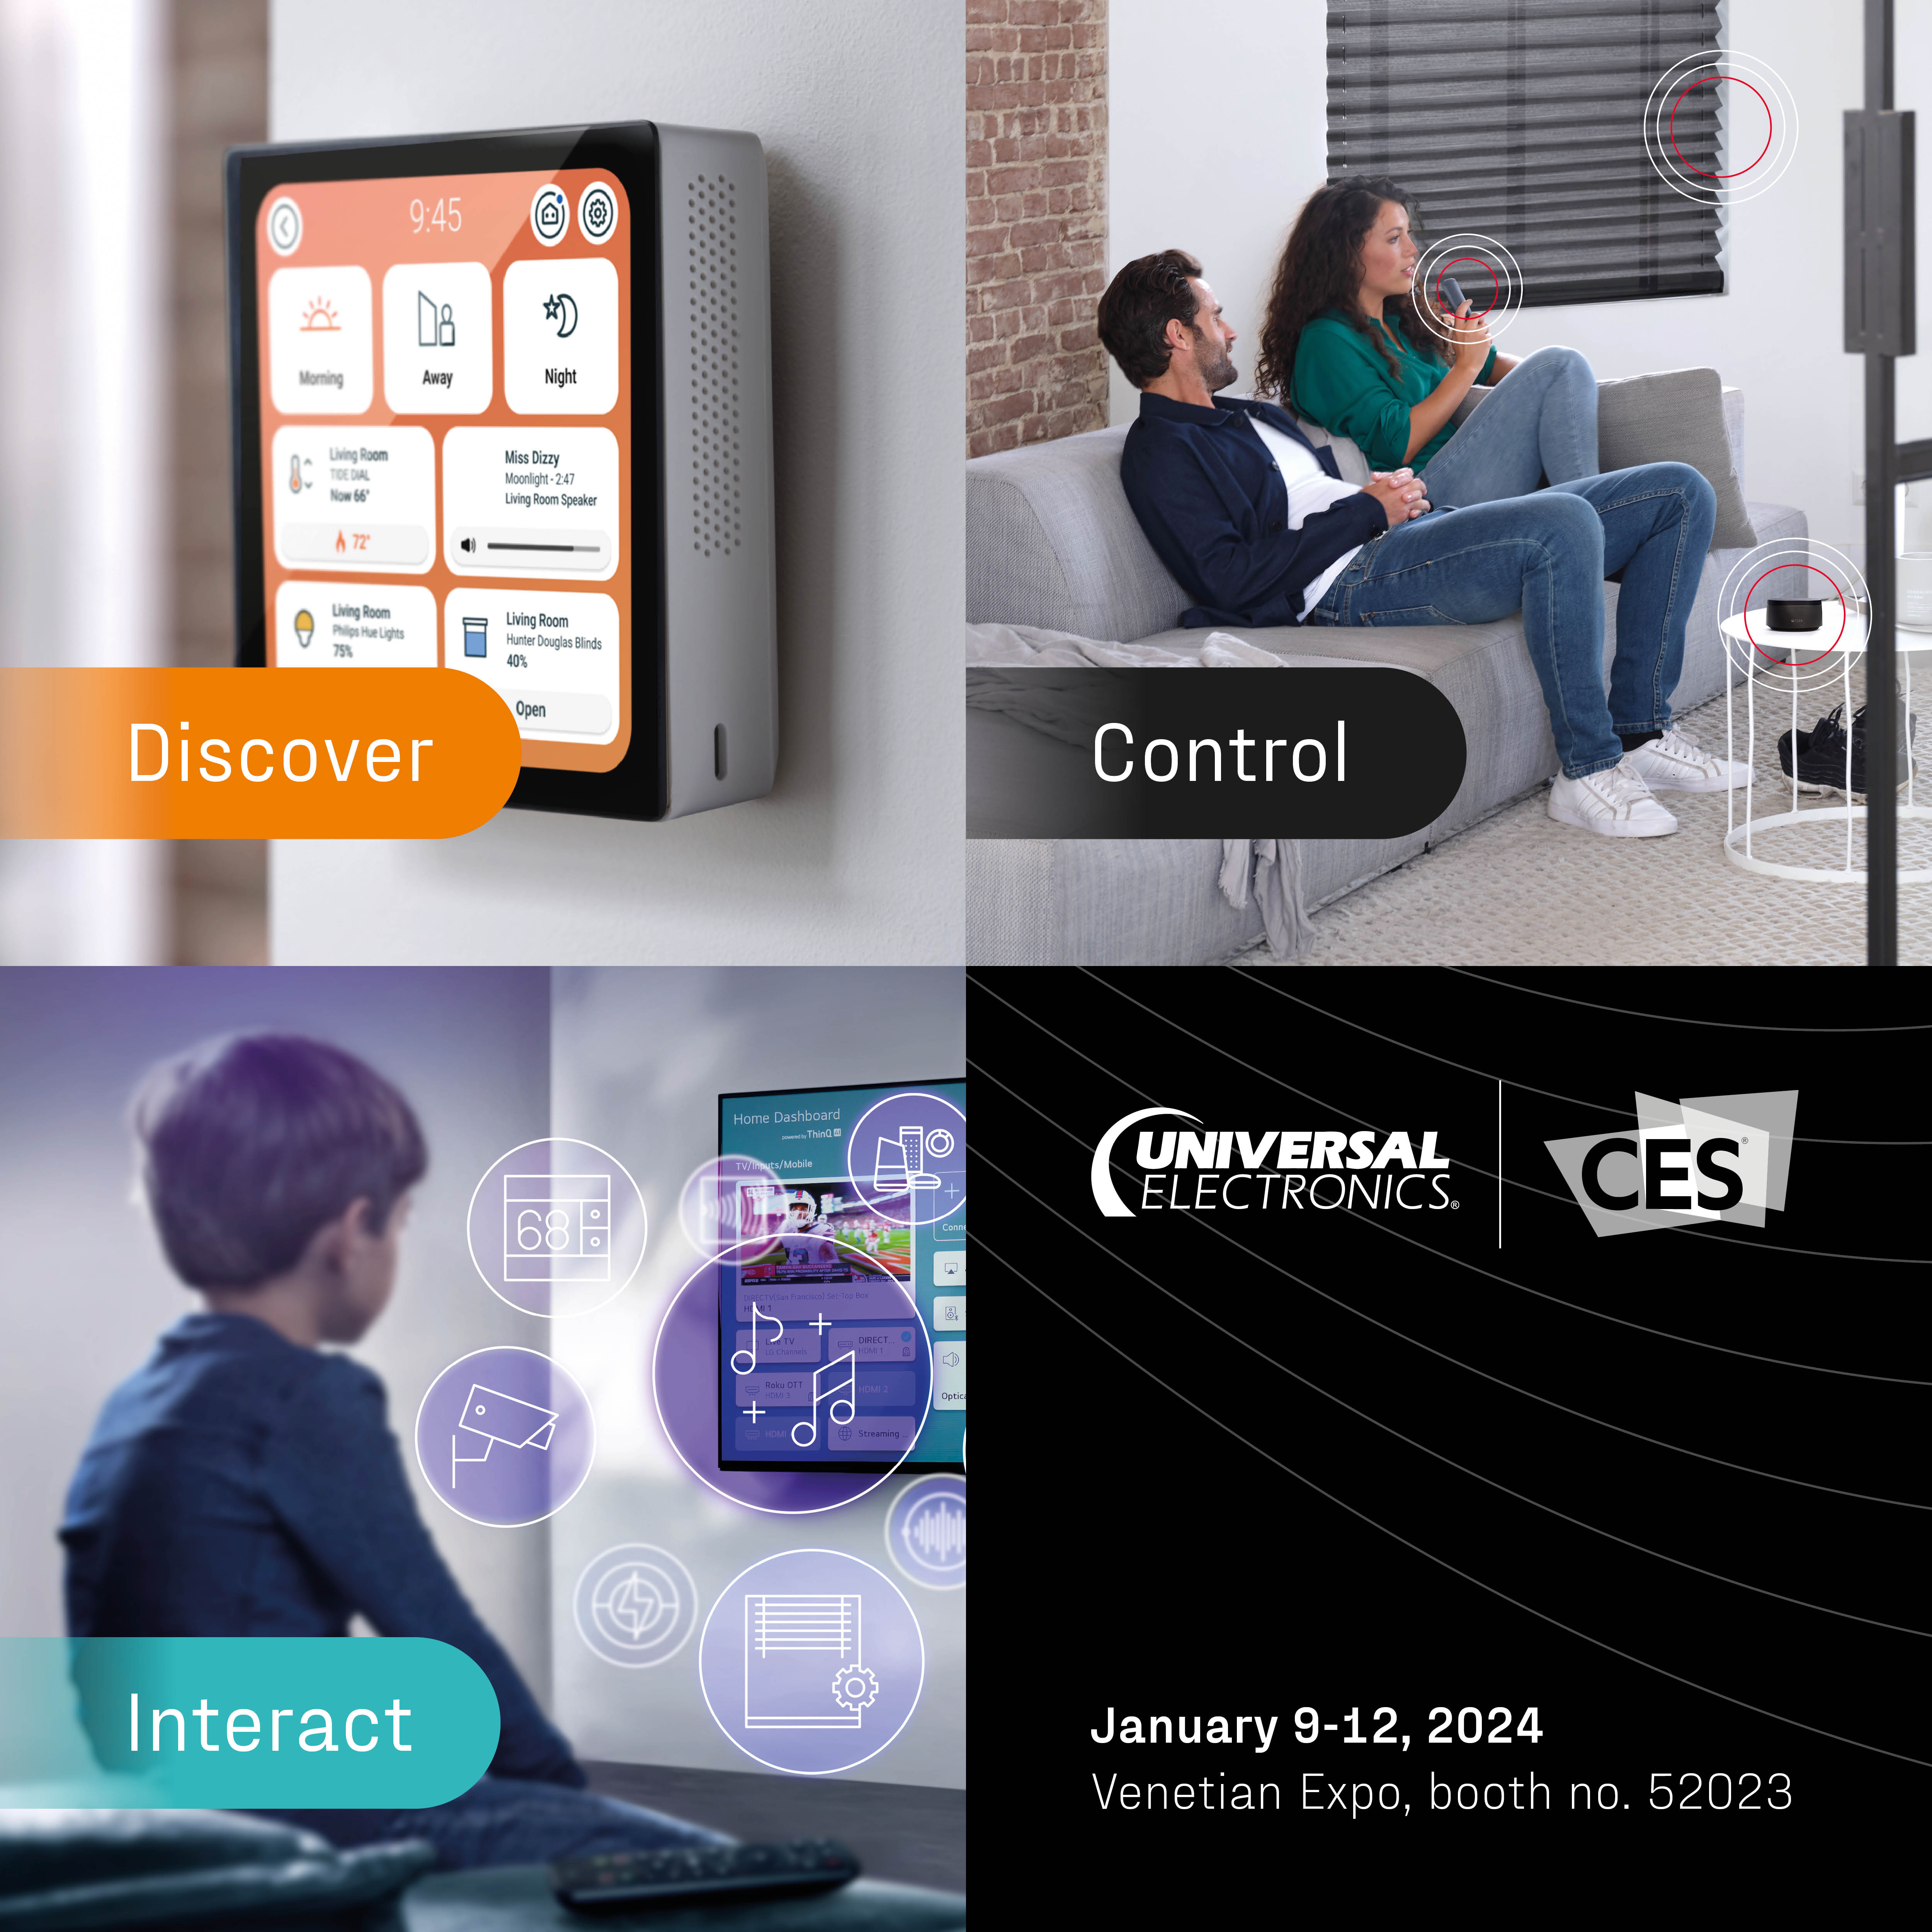 UEI Re-Imagines Smart Home Control Through an Expanded Portfolio of Connected  Products and Technology Solutions at CES